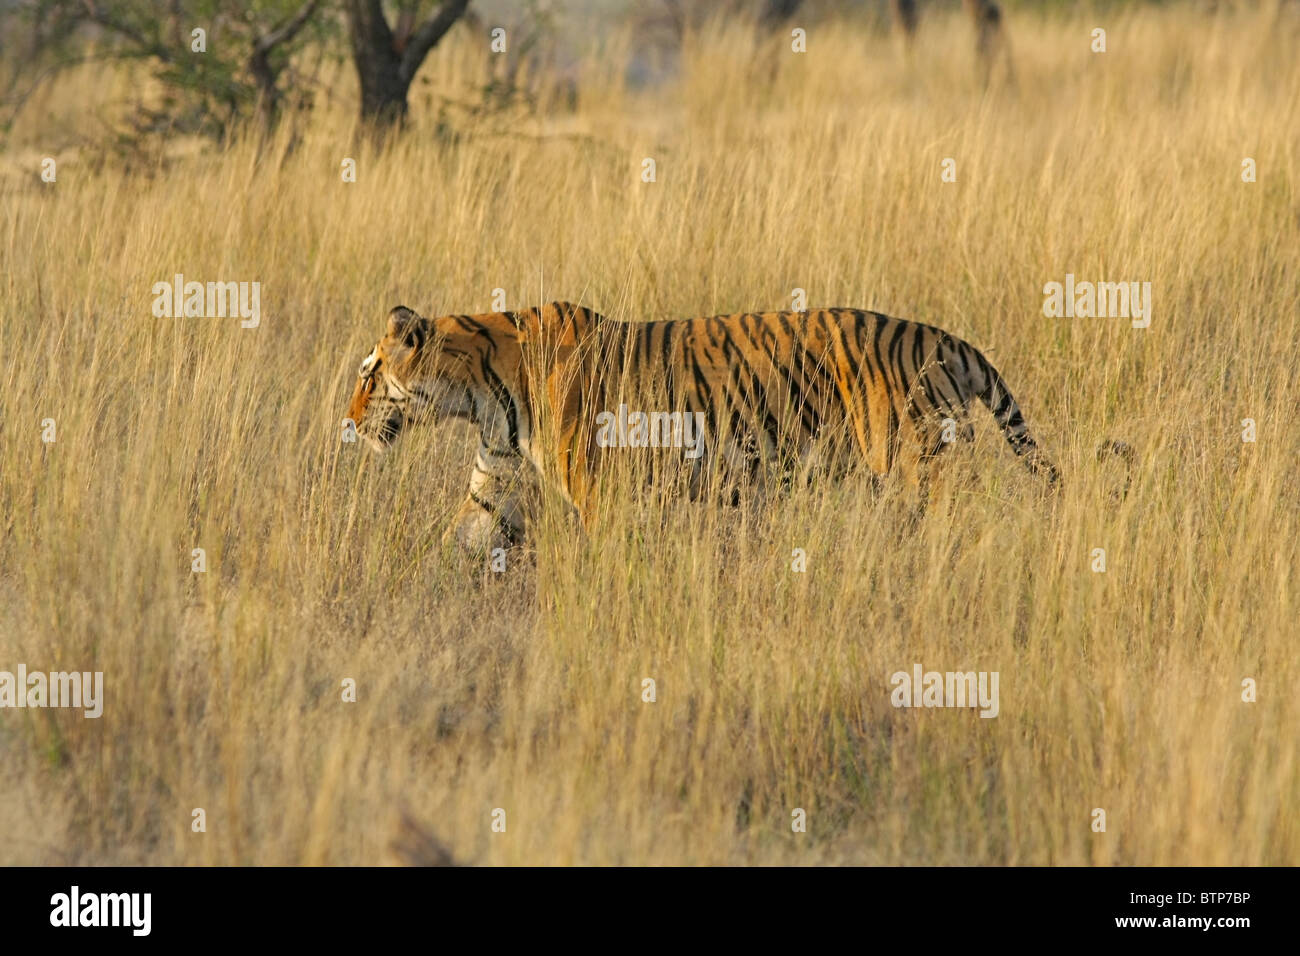 Male Tiger walking through the tall grass in Ranthambhore National Park, India Stock Photo